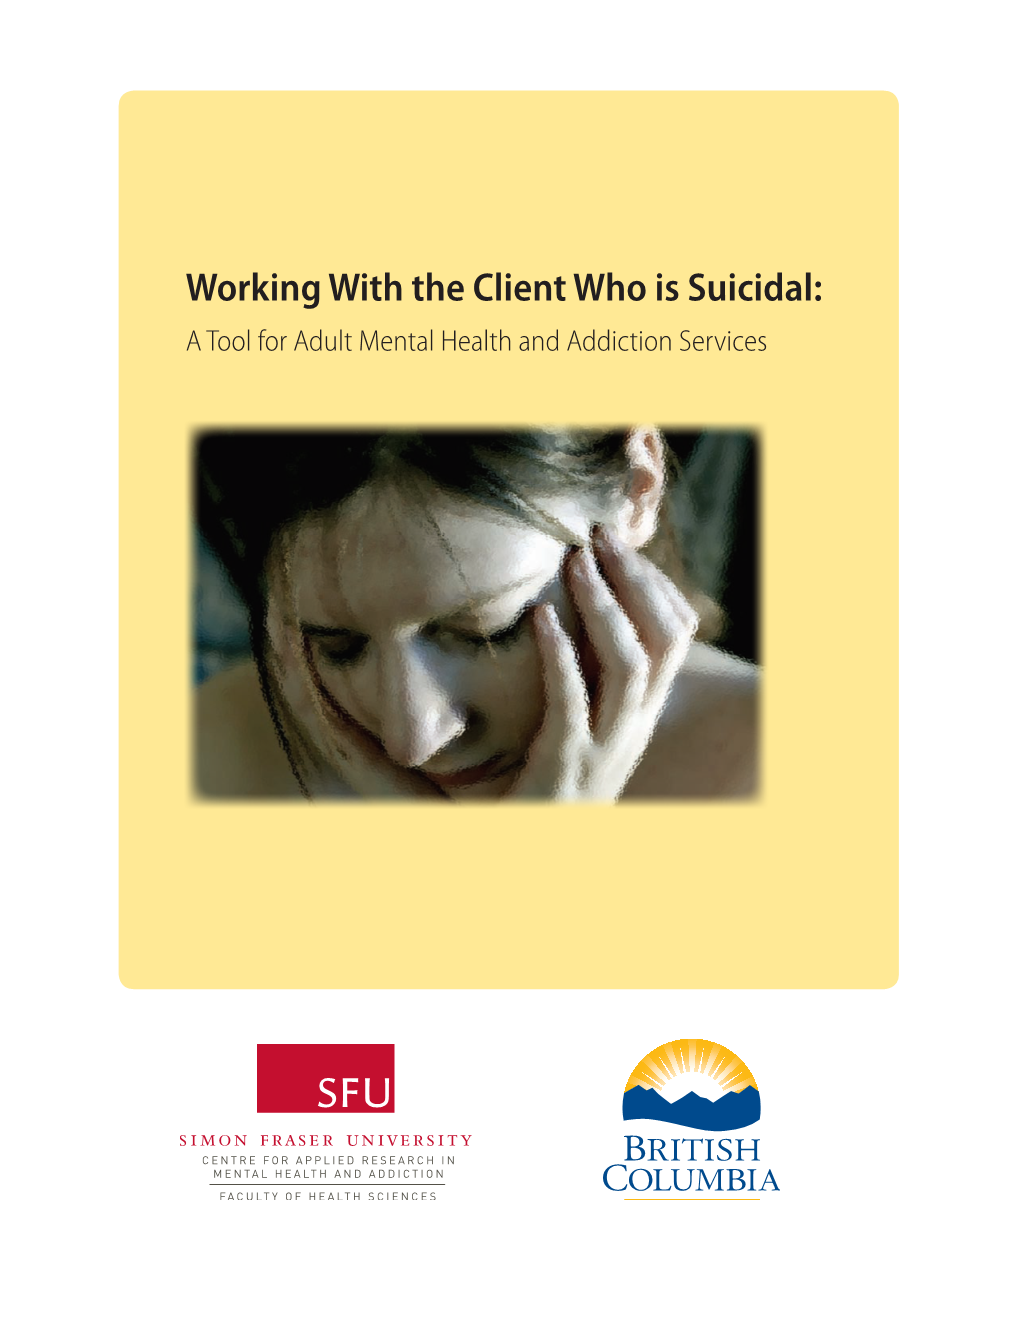 Working with the Client Who Is Suicidal: a Tool for Adult Mental